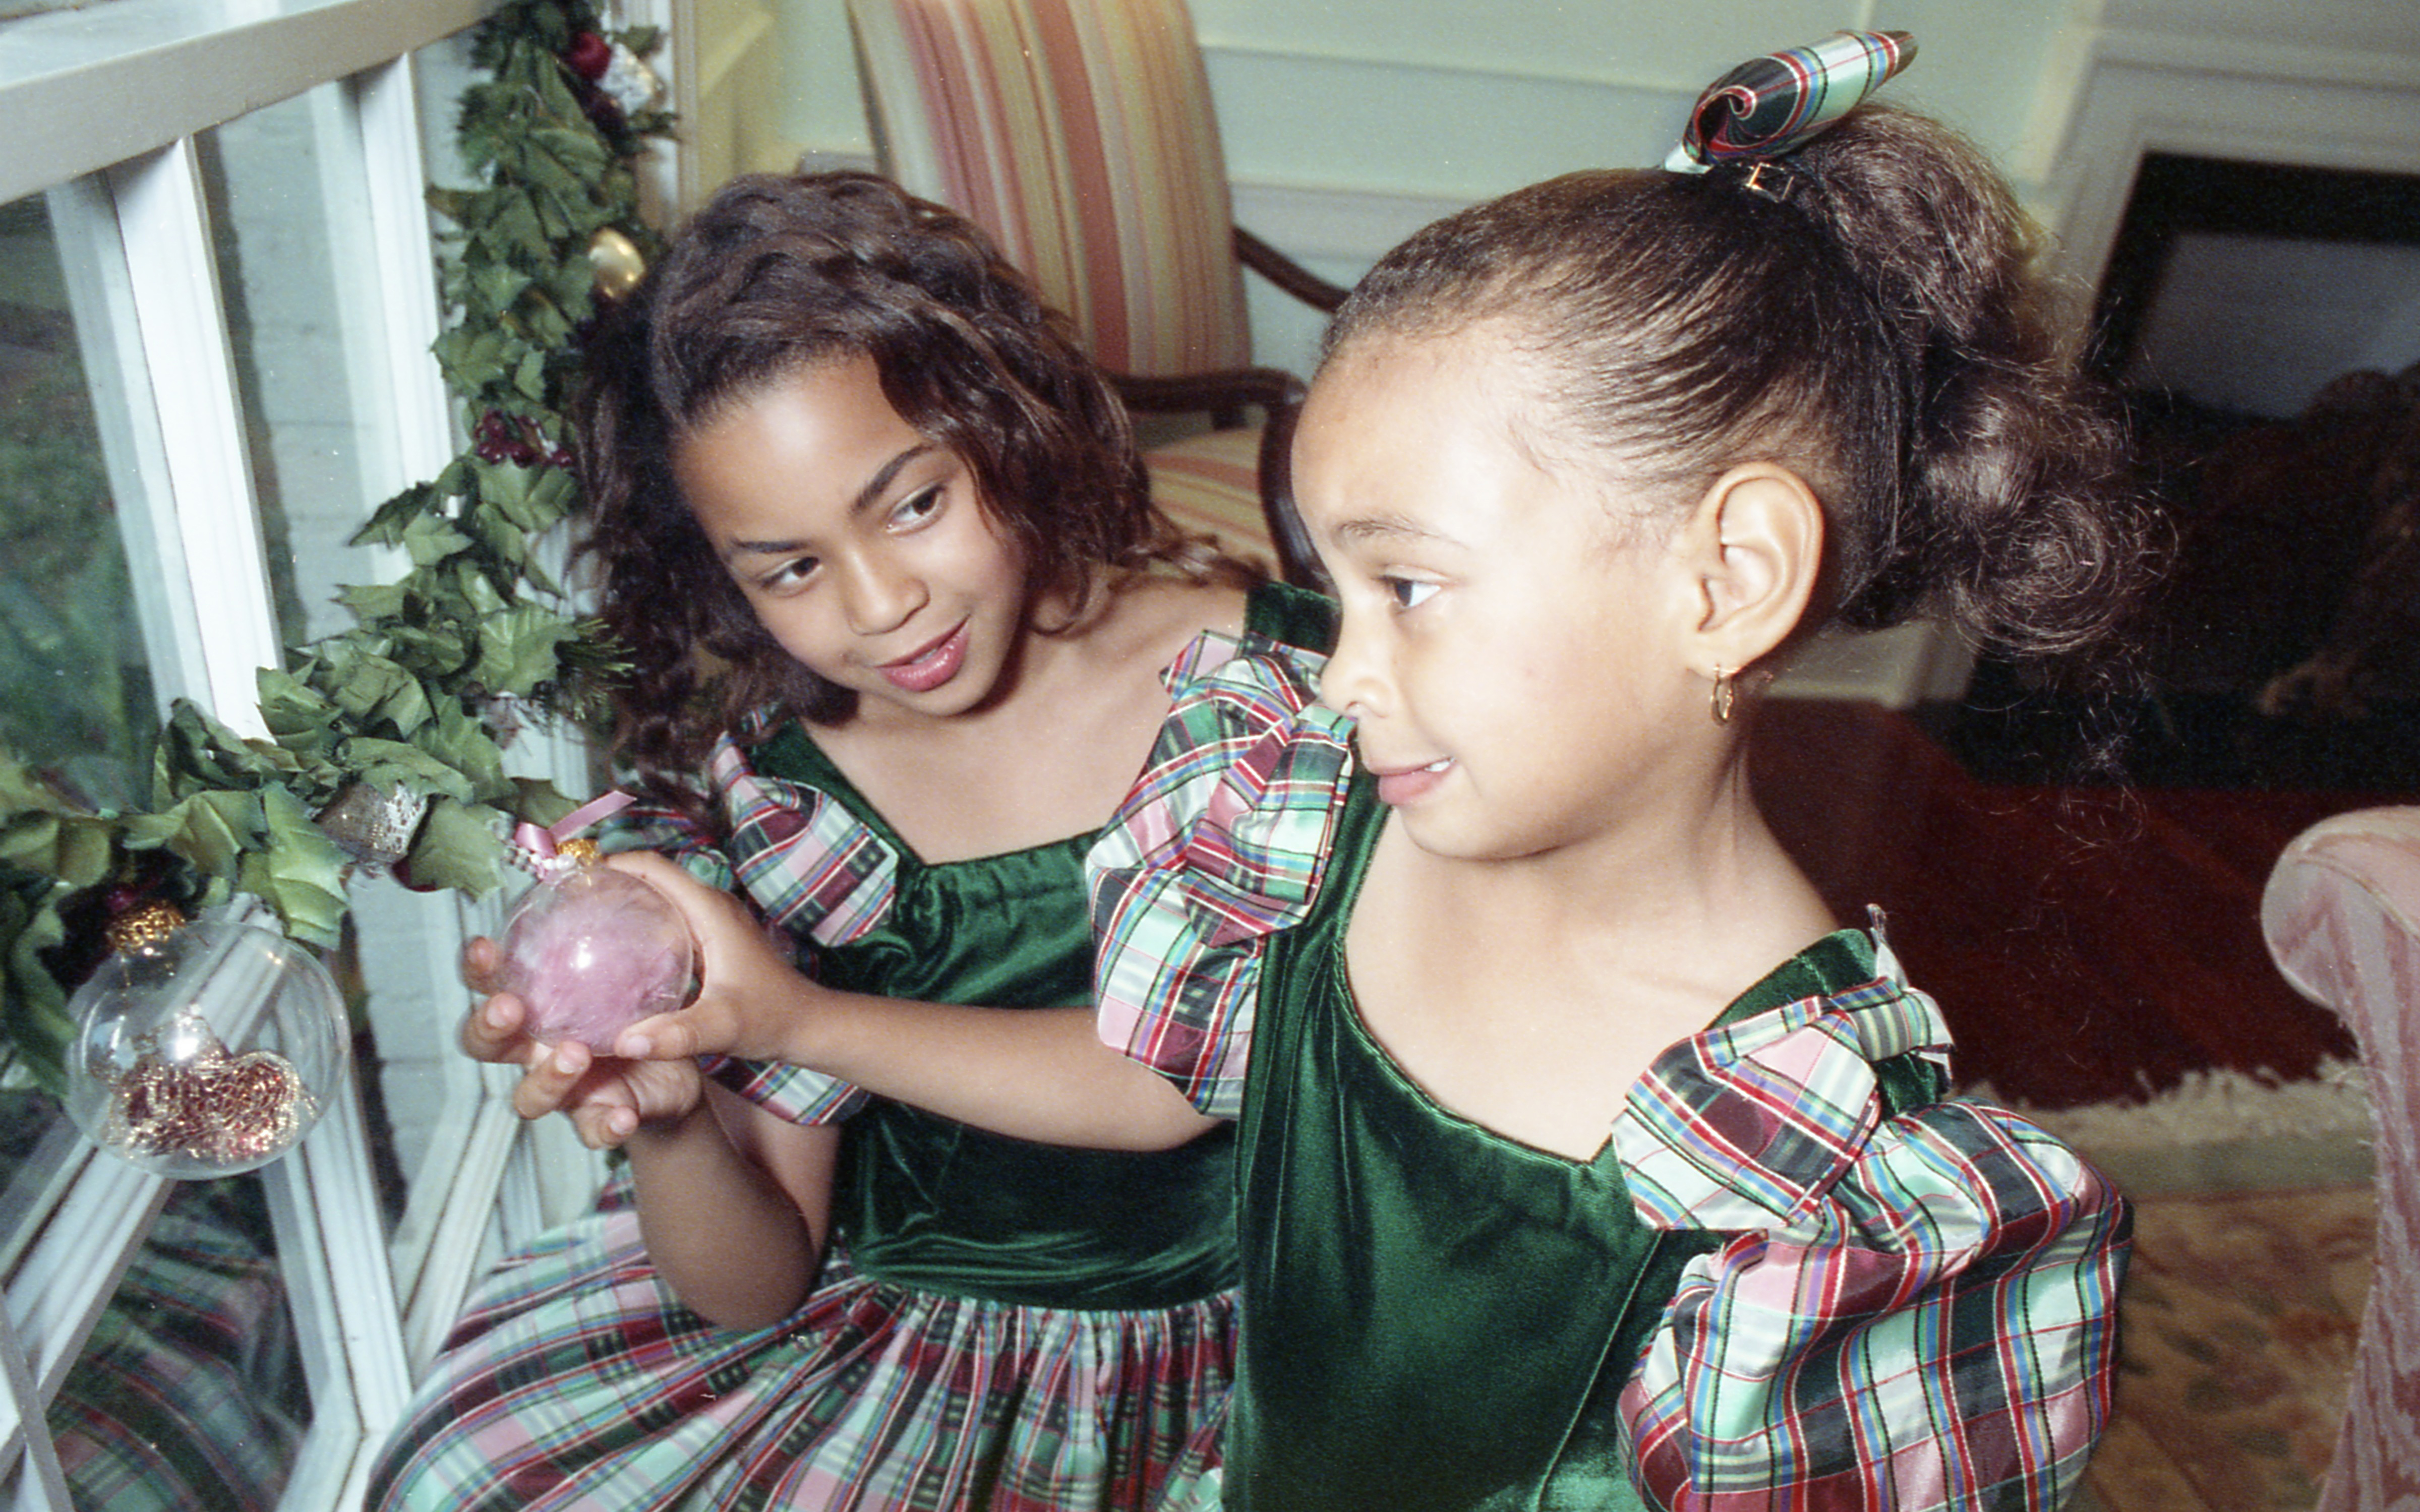 Sisters Beyonce and Solange Knowles at their home in October 23, 1990 | Source: Getty Images